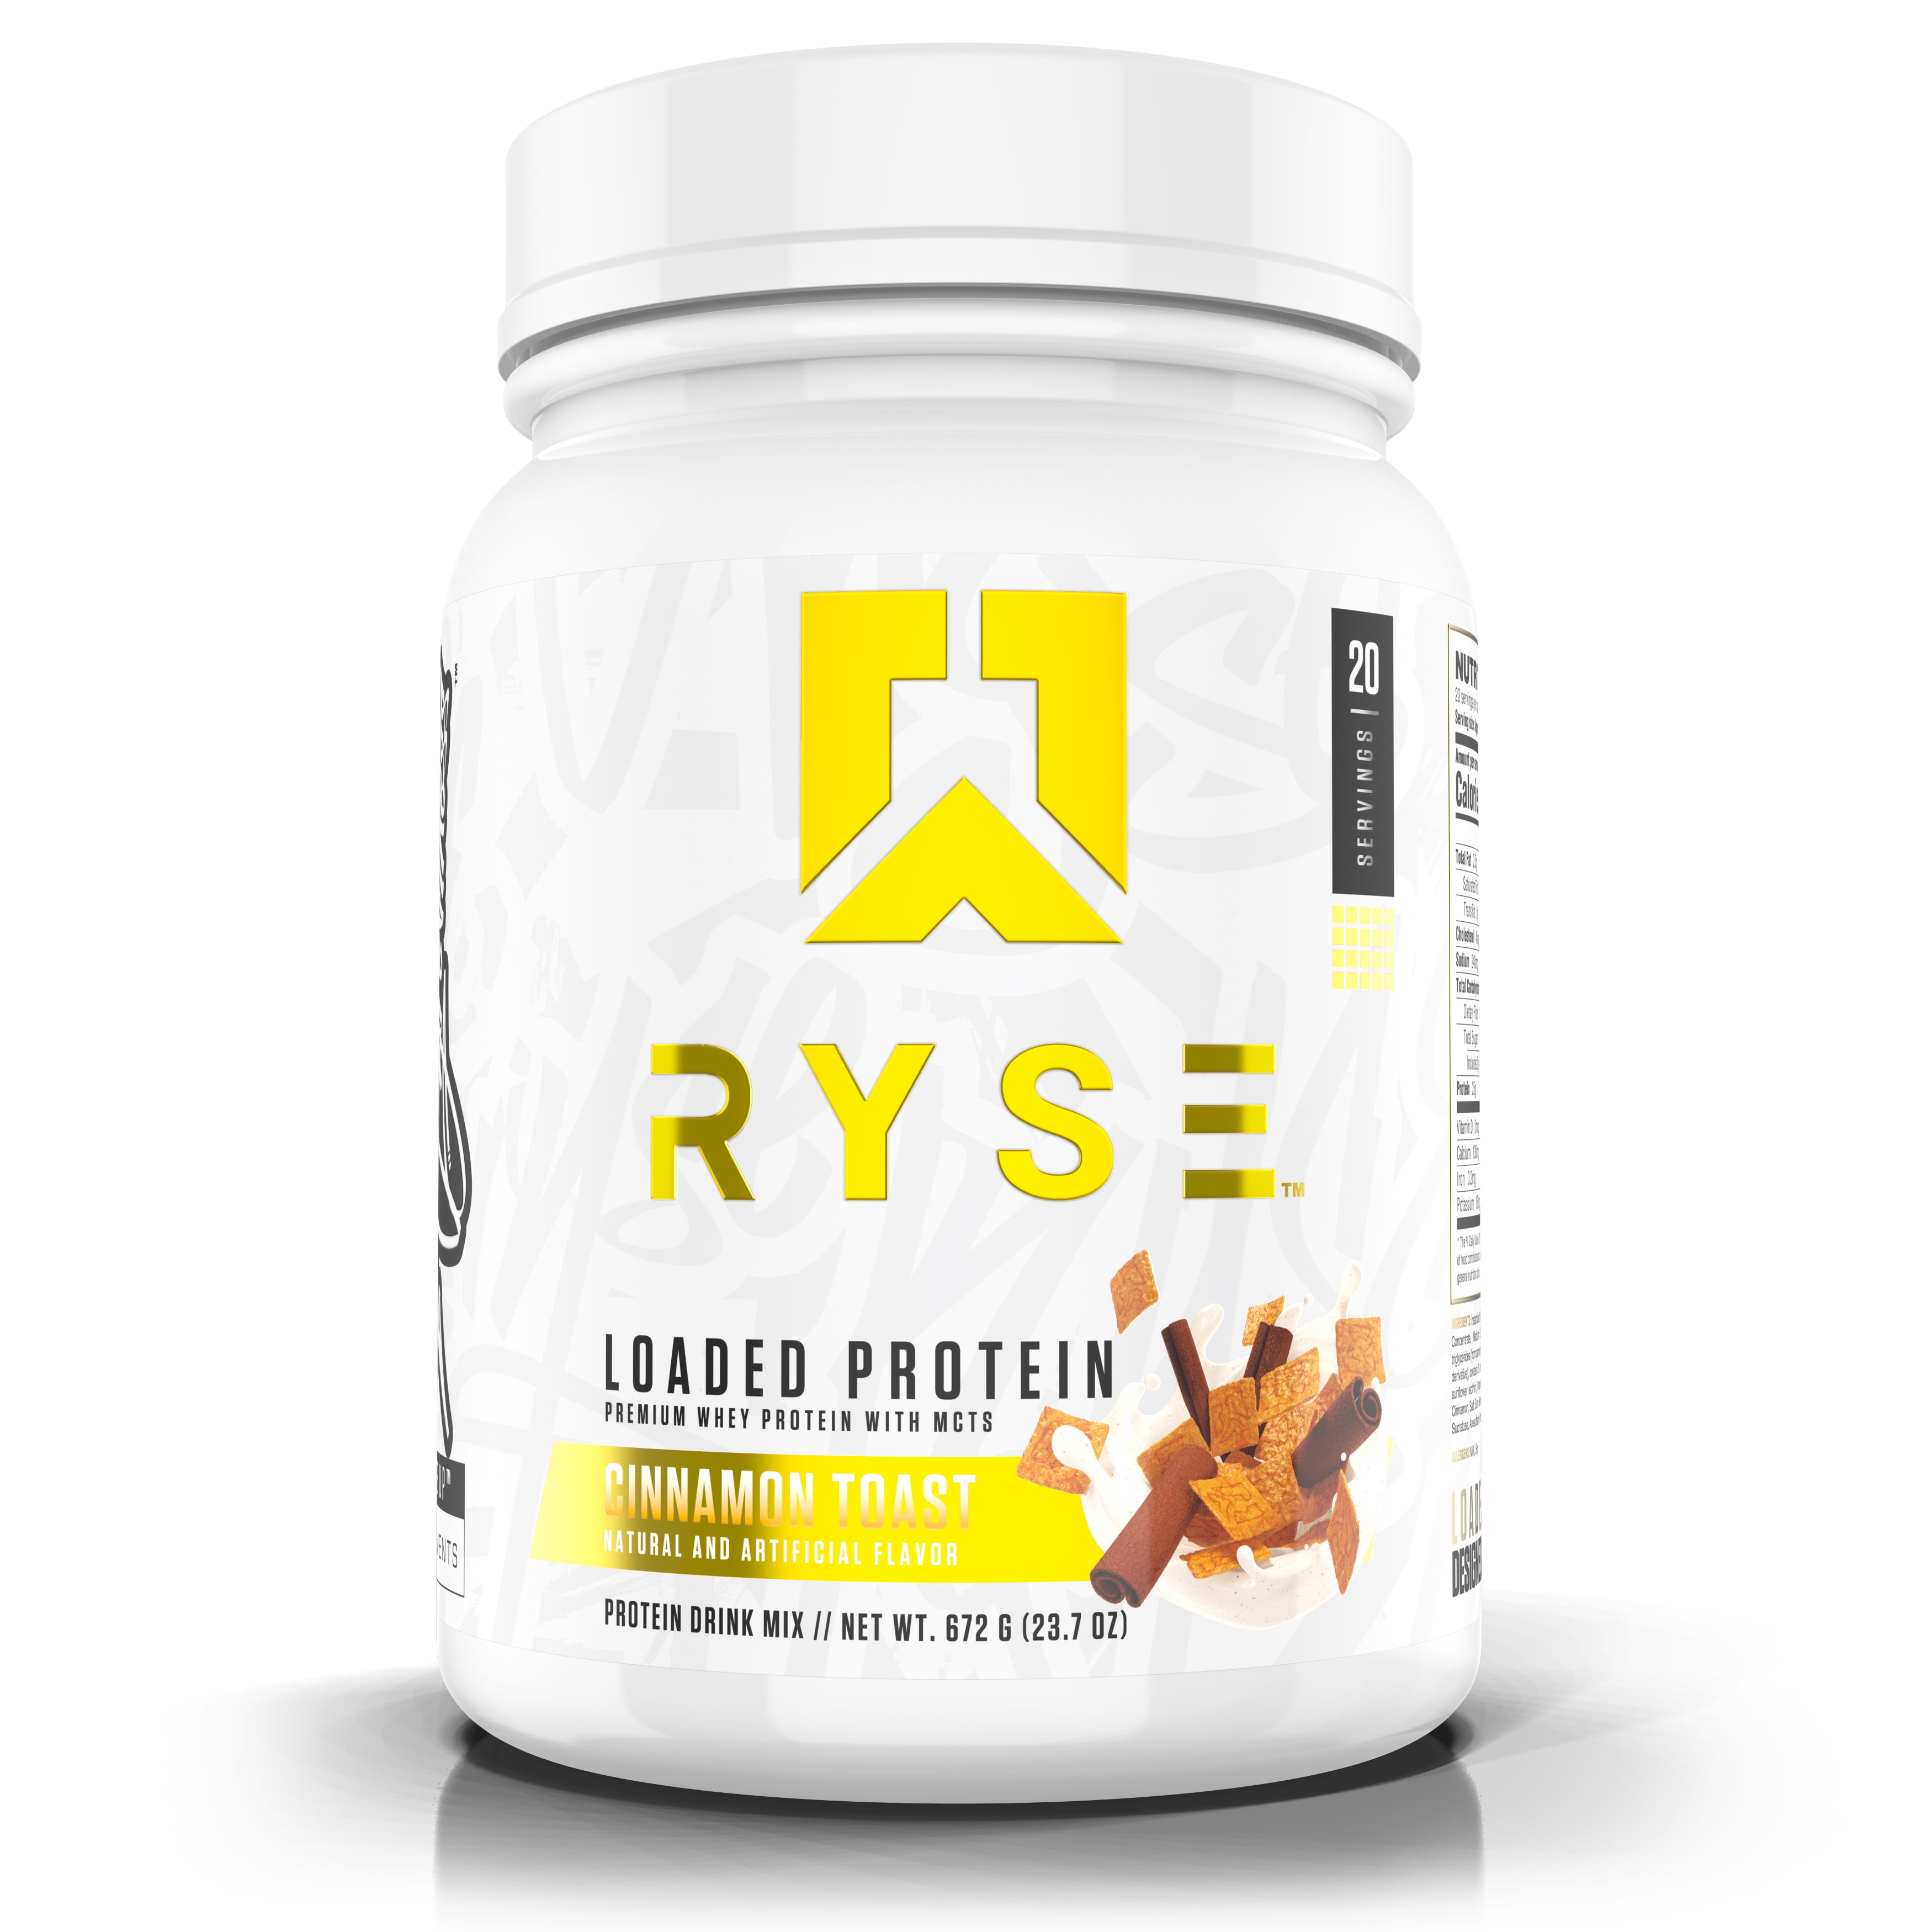 Ryse Loaded Protein Powder, 25g Whey Protein Isolate & Concentrate, with  Prebiotic Fiber & MCTs, Low Carbs & Low Sugar